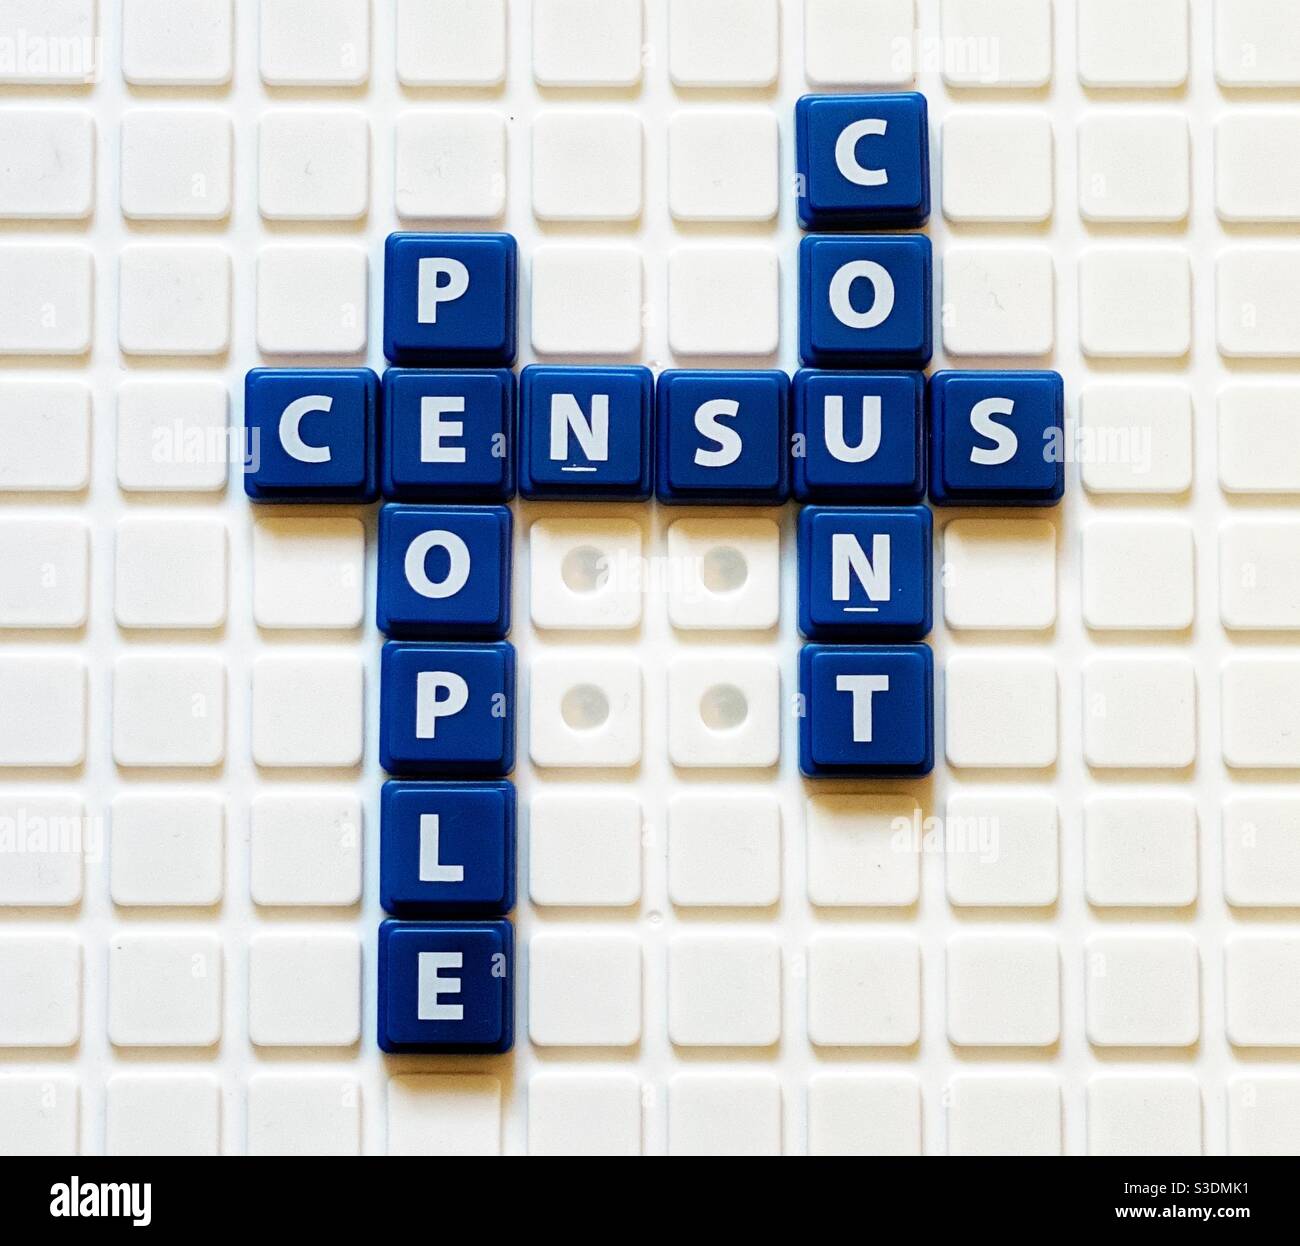 The words census, count and people spelt out using tiles Stock Photo